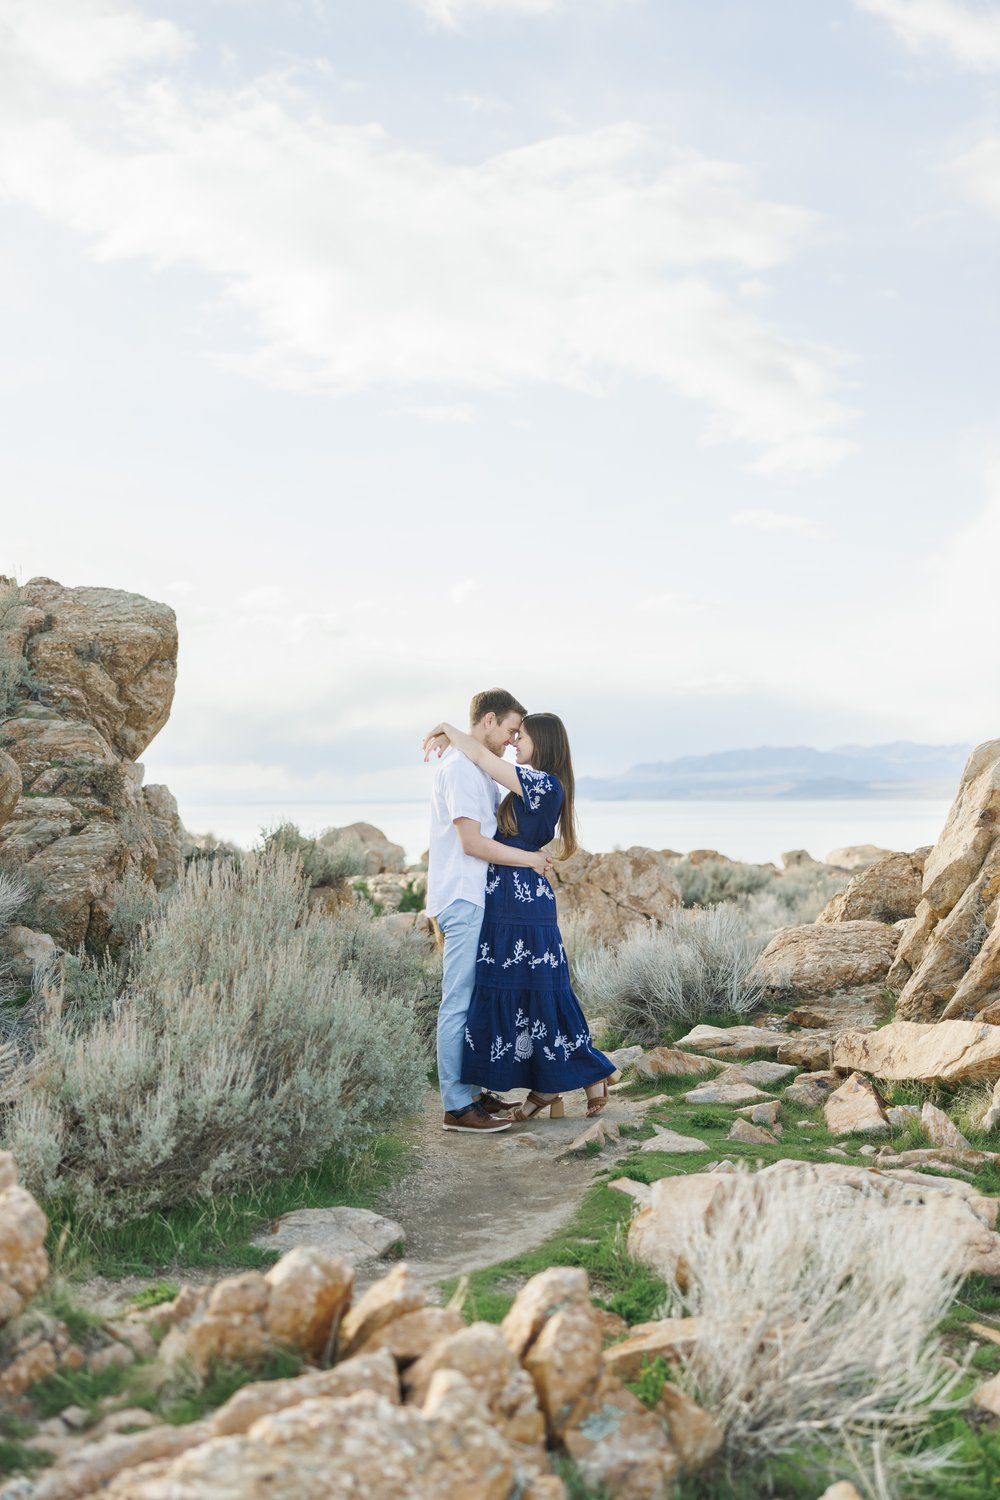  Newly engaged man and woman hug on Antelope Island featuring lake and sky behind them by Savanna Richardson Photography. lake engagement ideas outdoor Utah engagements #SavannaRichardsonPhotography #SavannaRichardsonEngagements #UtahEngagements #Ant